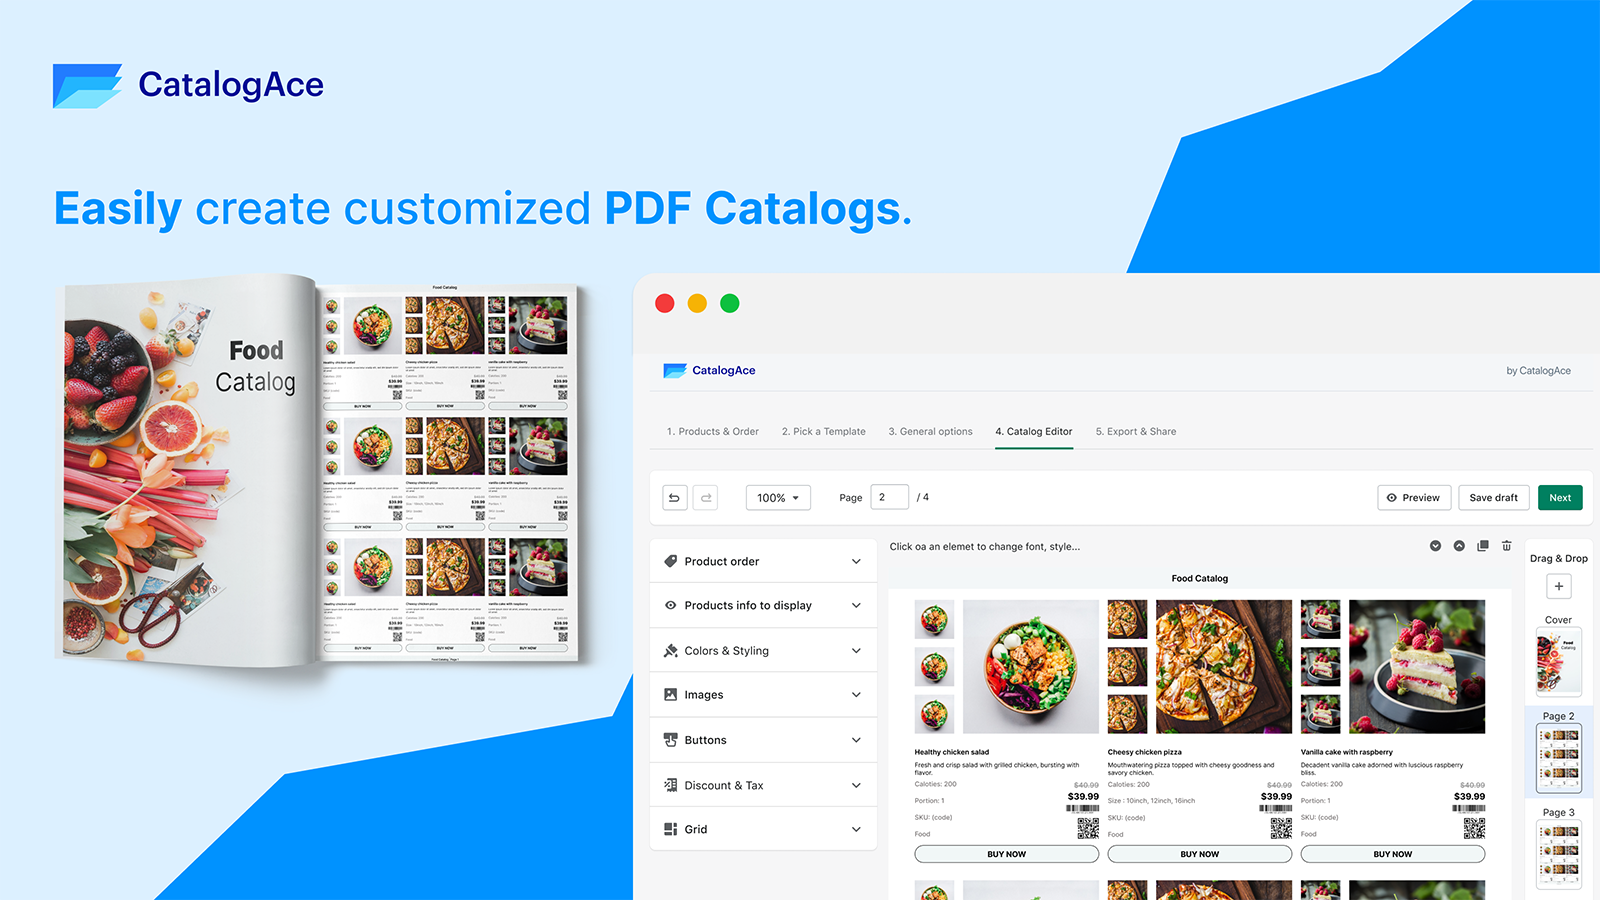 Convert your collections and products into customized catalogs